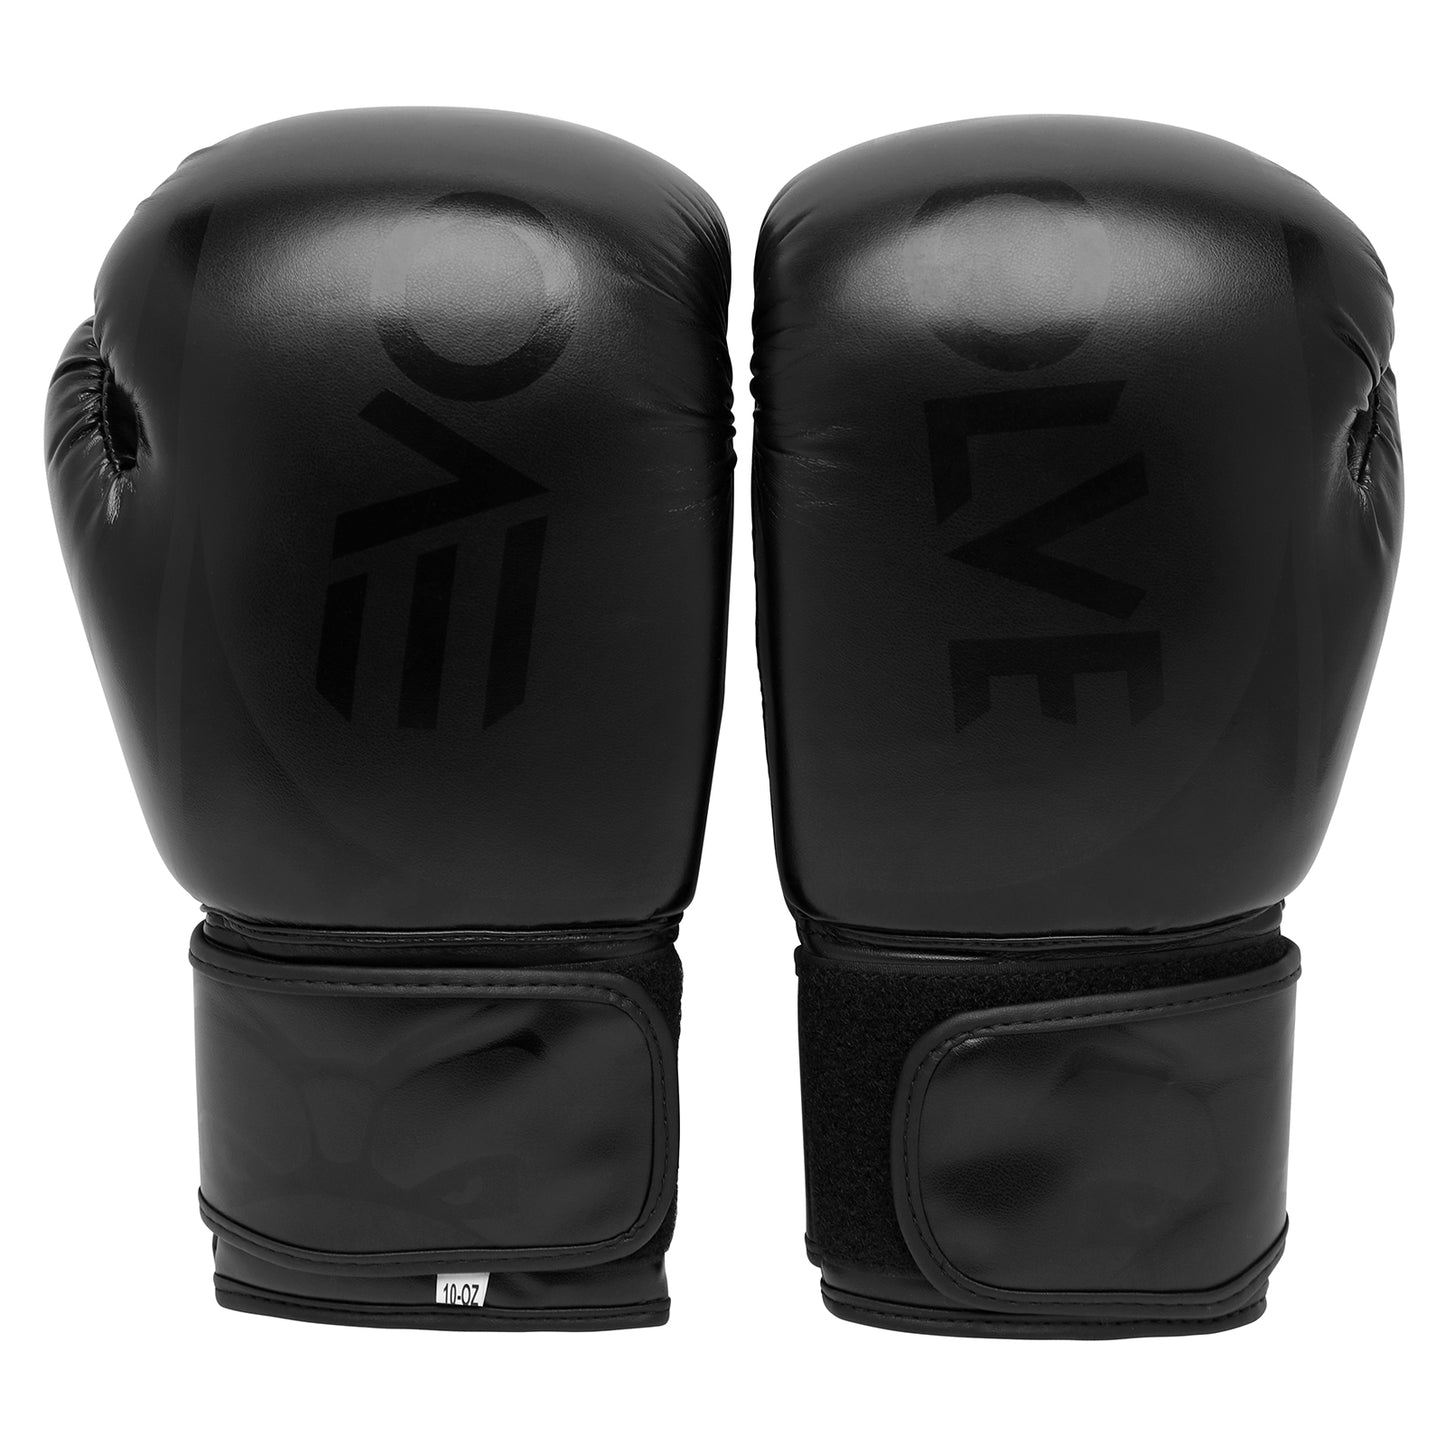 Evolve Boxing Gloves | Foam Padded Boxing and Kickboxing Gloves for Training and Sparring with Adjustable Straps Ventilation Holes and Cushioned Inner Lining